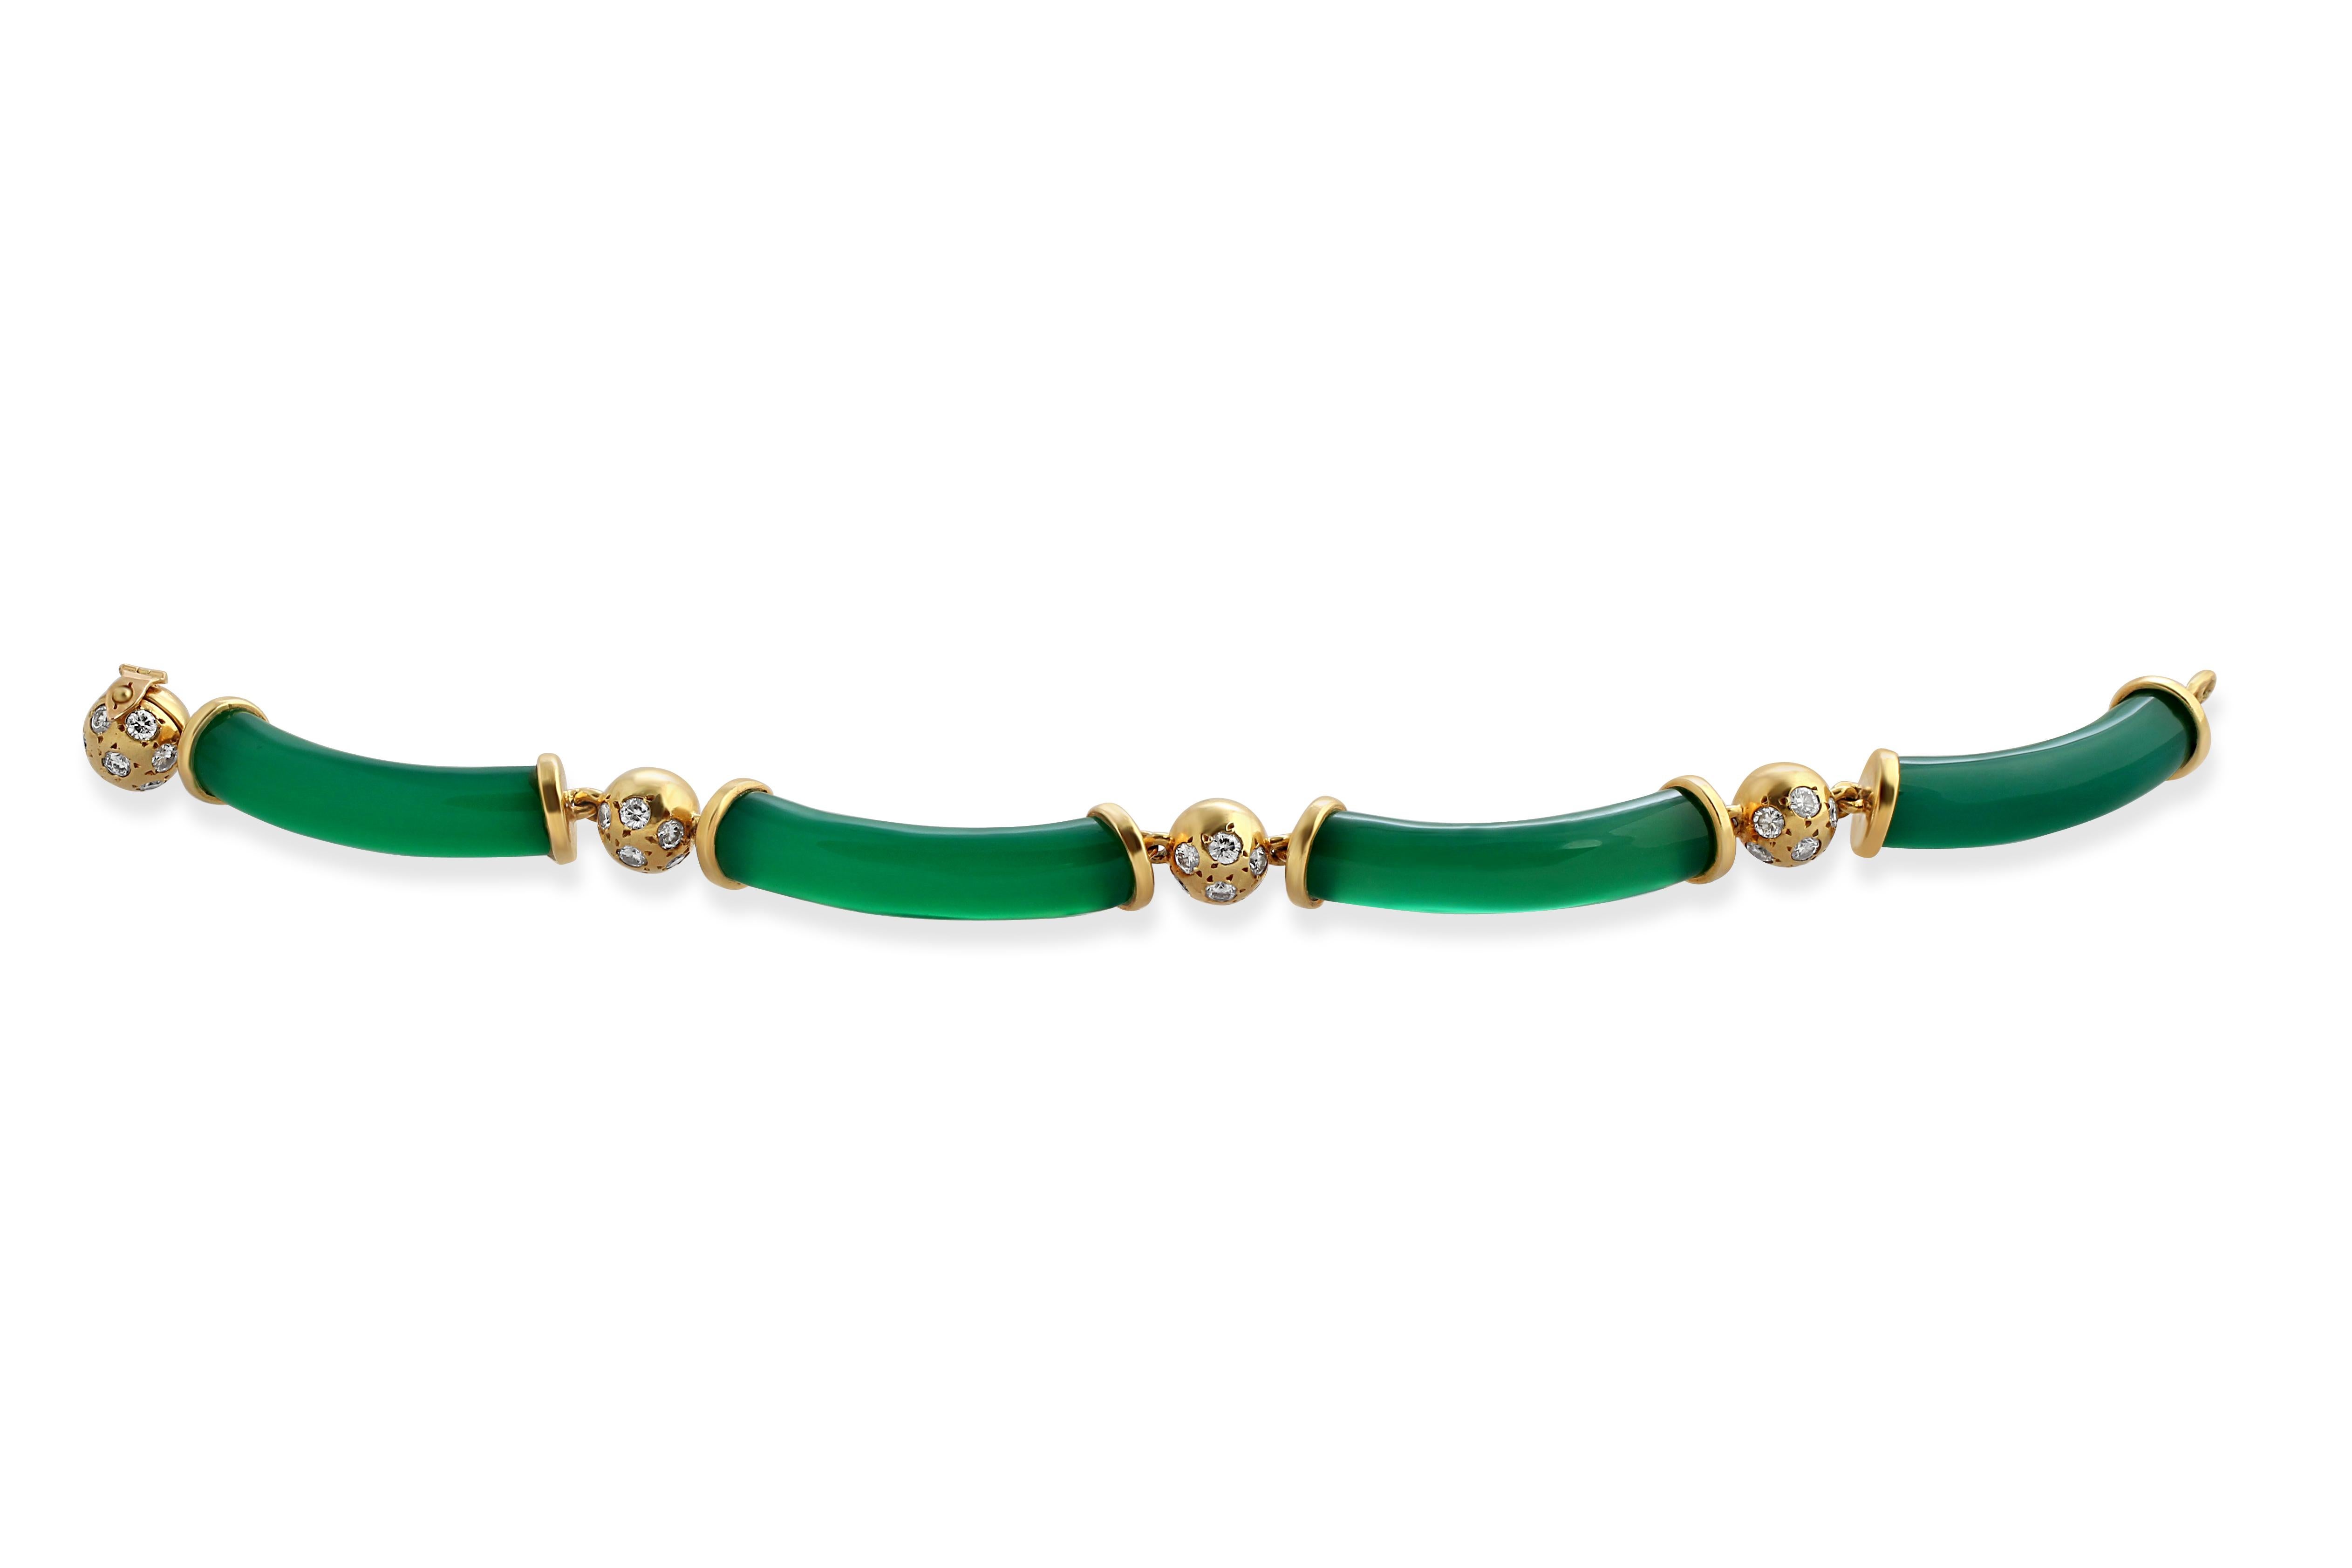 An 18k gold bracelet by Van Cleef & Arpels with four chalcedony links spaced with diamond set gold beads. Circa 1970s. Weight = 33gr.
